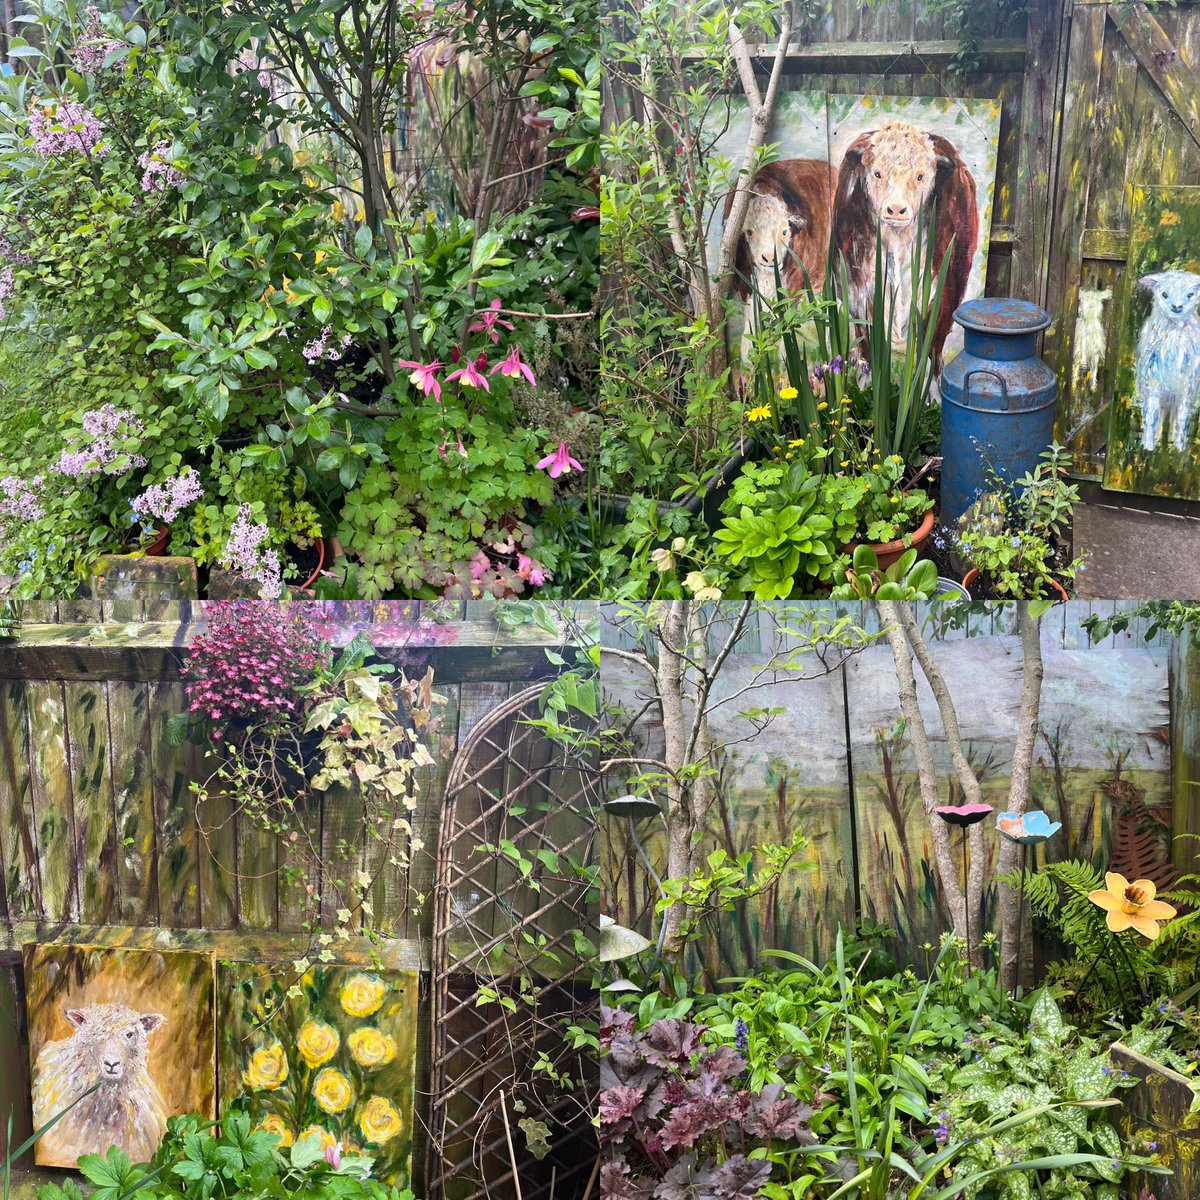 A selection of #paintings as backgrounds in my tiny garden. You can see I like animals as well as plants! #GardensHour #GardeningTwitter